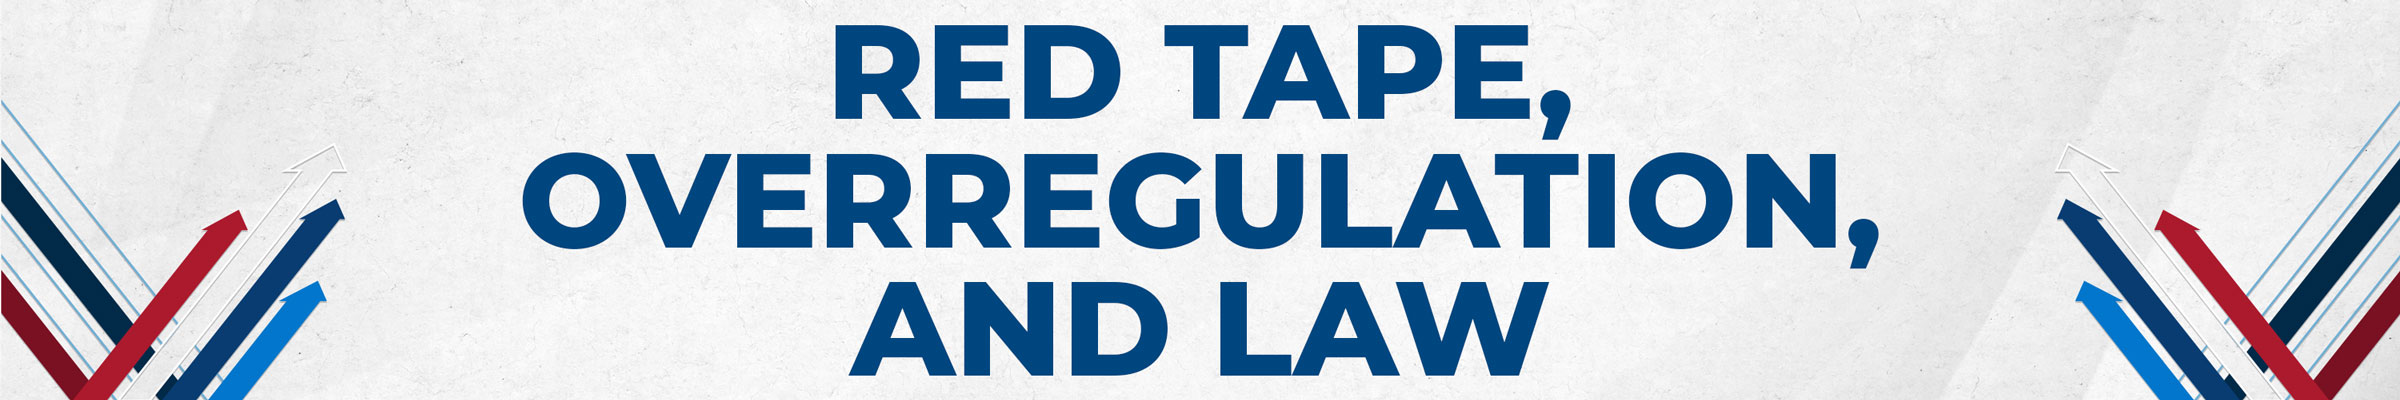 Red tape, overregulation, and law header image